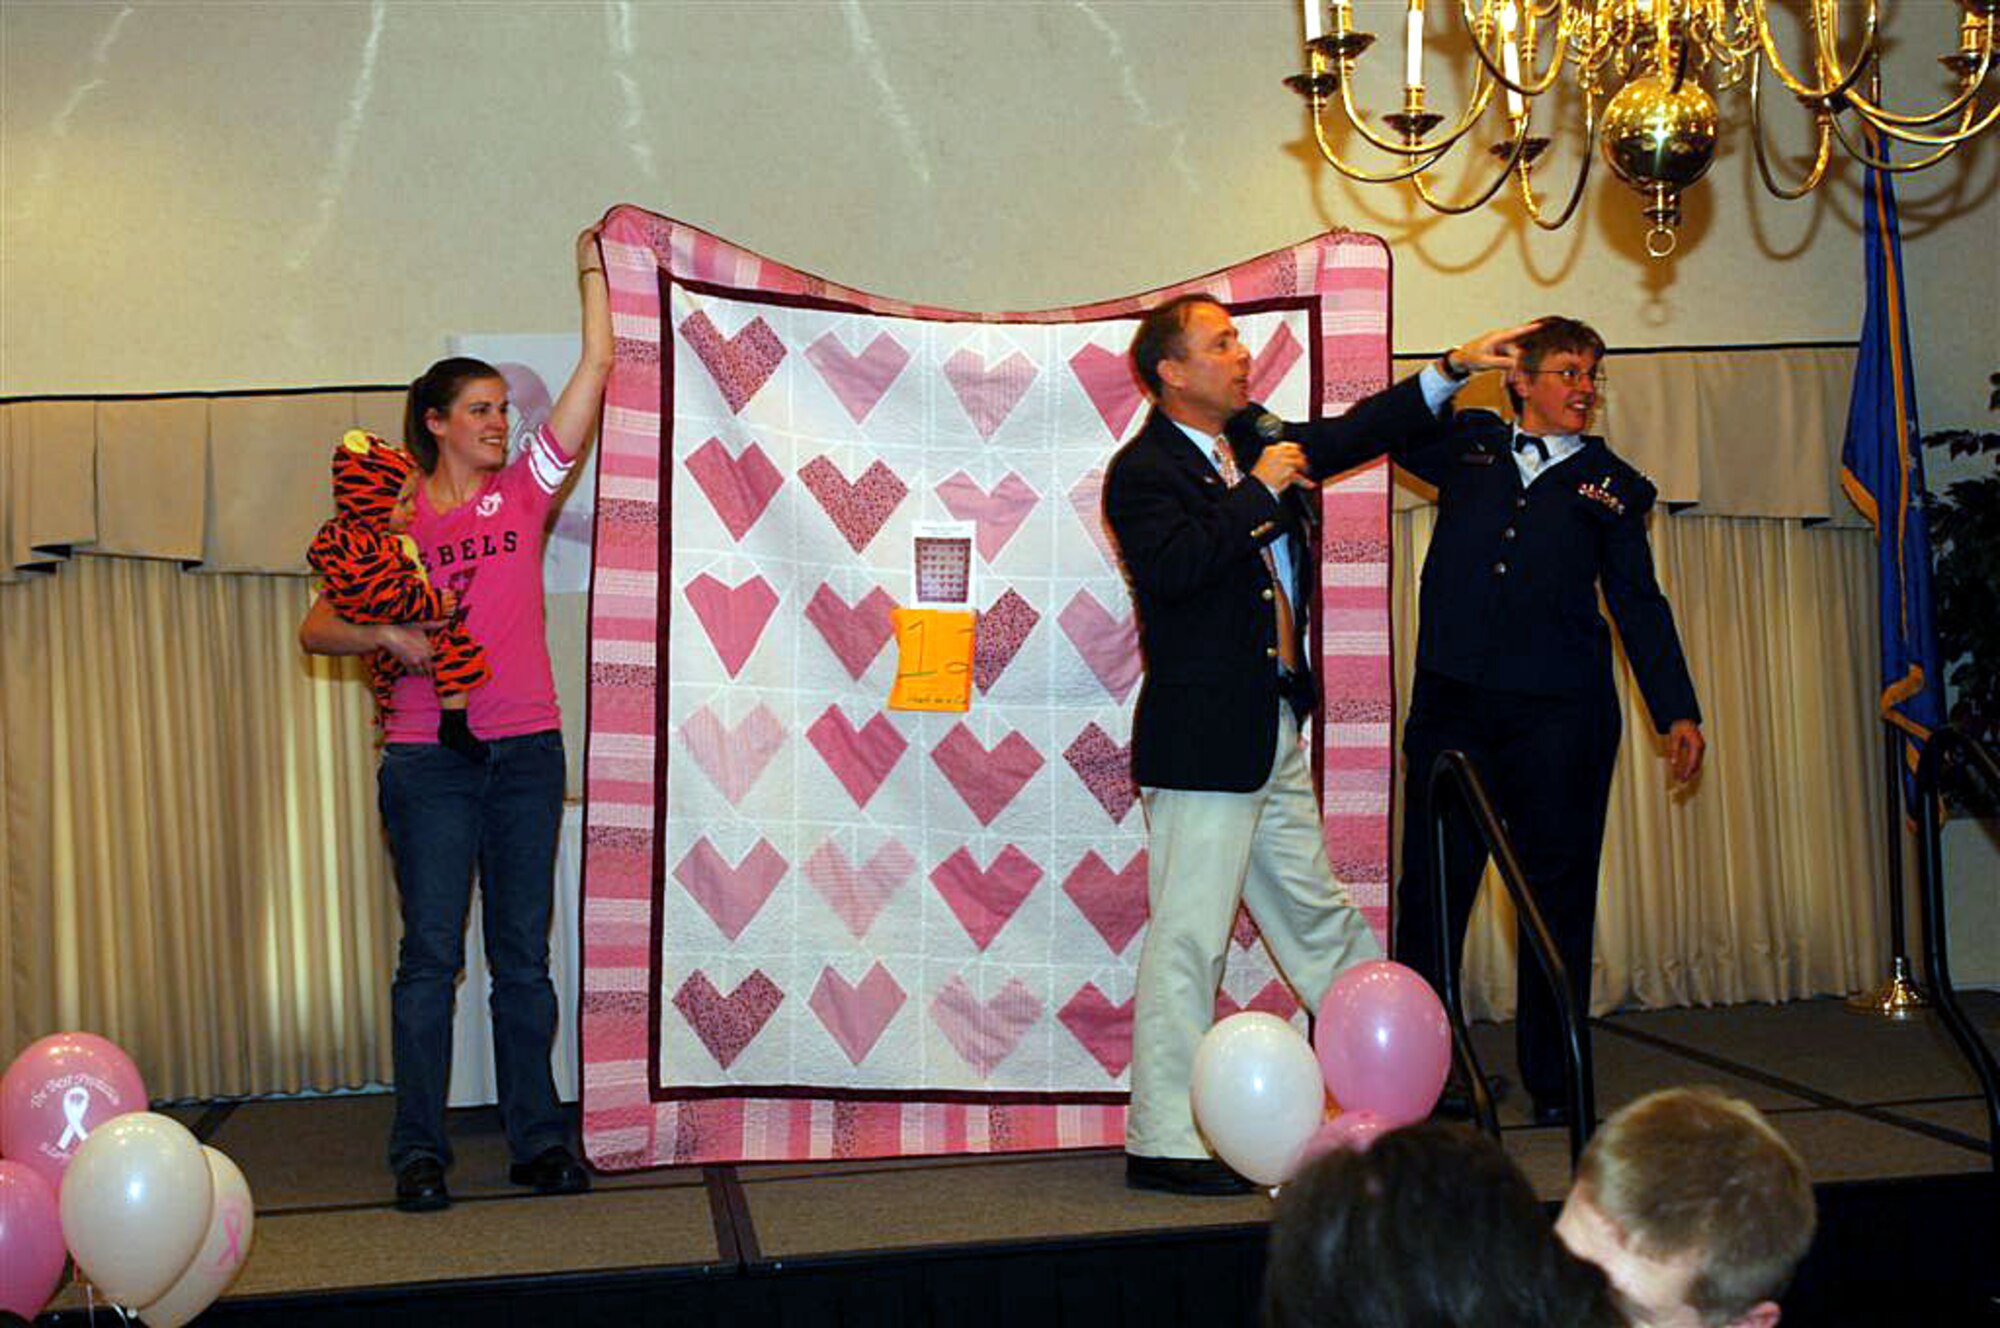 Bill Large, from the 5th Medical Support Squadron, auctions off a quilt called "Hearts for a Cure" during the quilt auction for the National Breast Cancer Awareness Month event at Minot Air Force Base, N.D., Oct. 24, while the makers of the quilt -- Rebecca Ament and Lt. Col. Anne Heinly, 5th Medical Operations Squadron commander -- hold it up. All proceeds from the auction, which raised almost $4,000, were donated to breast cancer research through the Combined Federal Campaign. The event, themed "Voices of Breast Cancer, Inspiring Hope, Supporting a Cure, included a health fair and the personal testimony of several breast cancer survivors from the base community. Photo By: Airman First Class Cassandra Butler